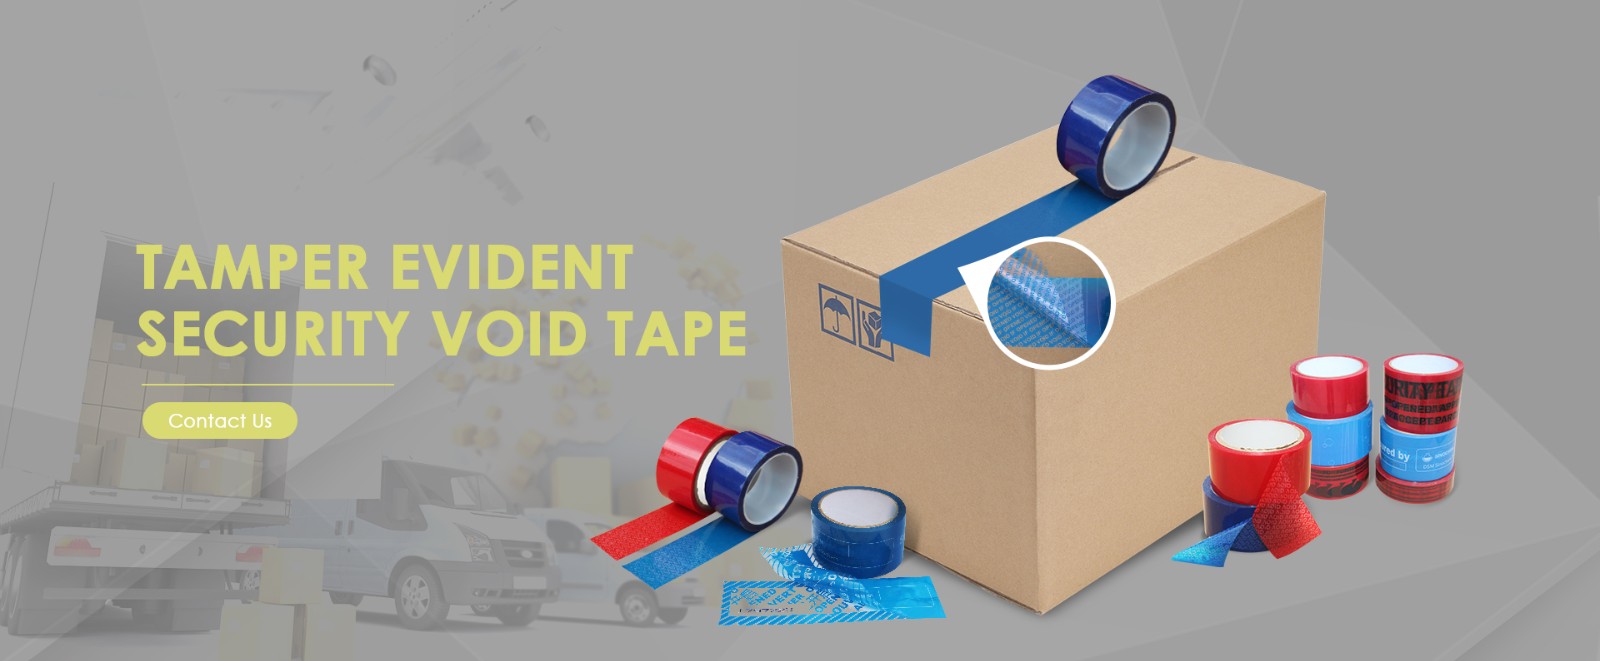 Application and function of Tamper Evident Security label and tape